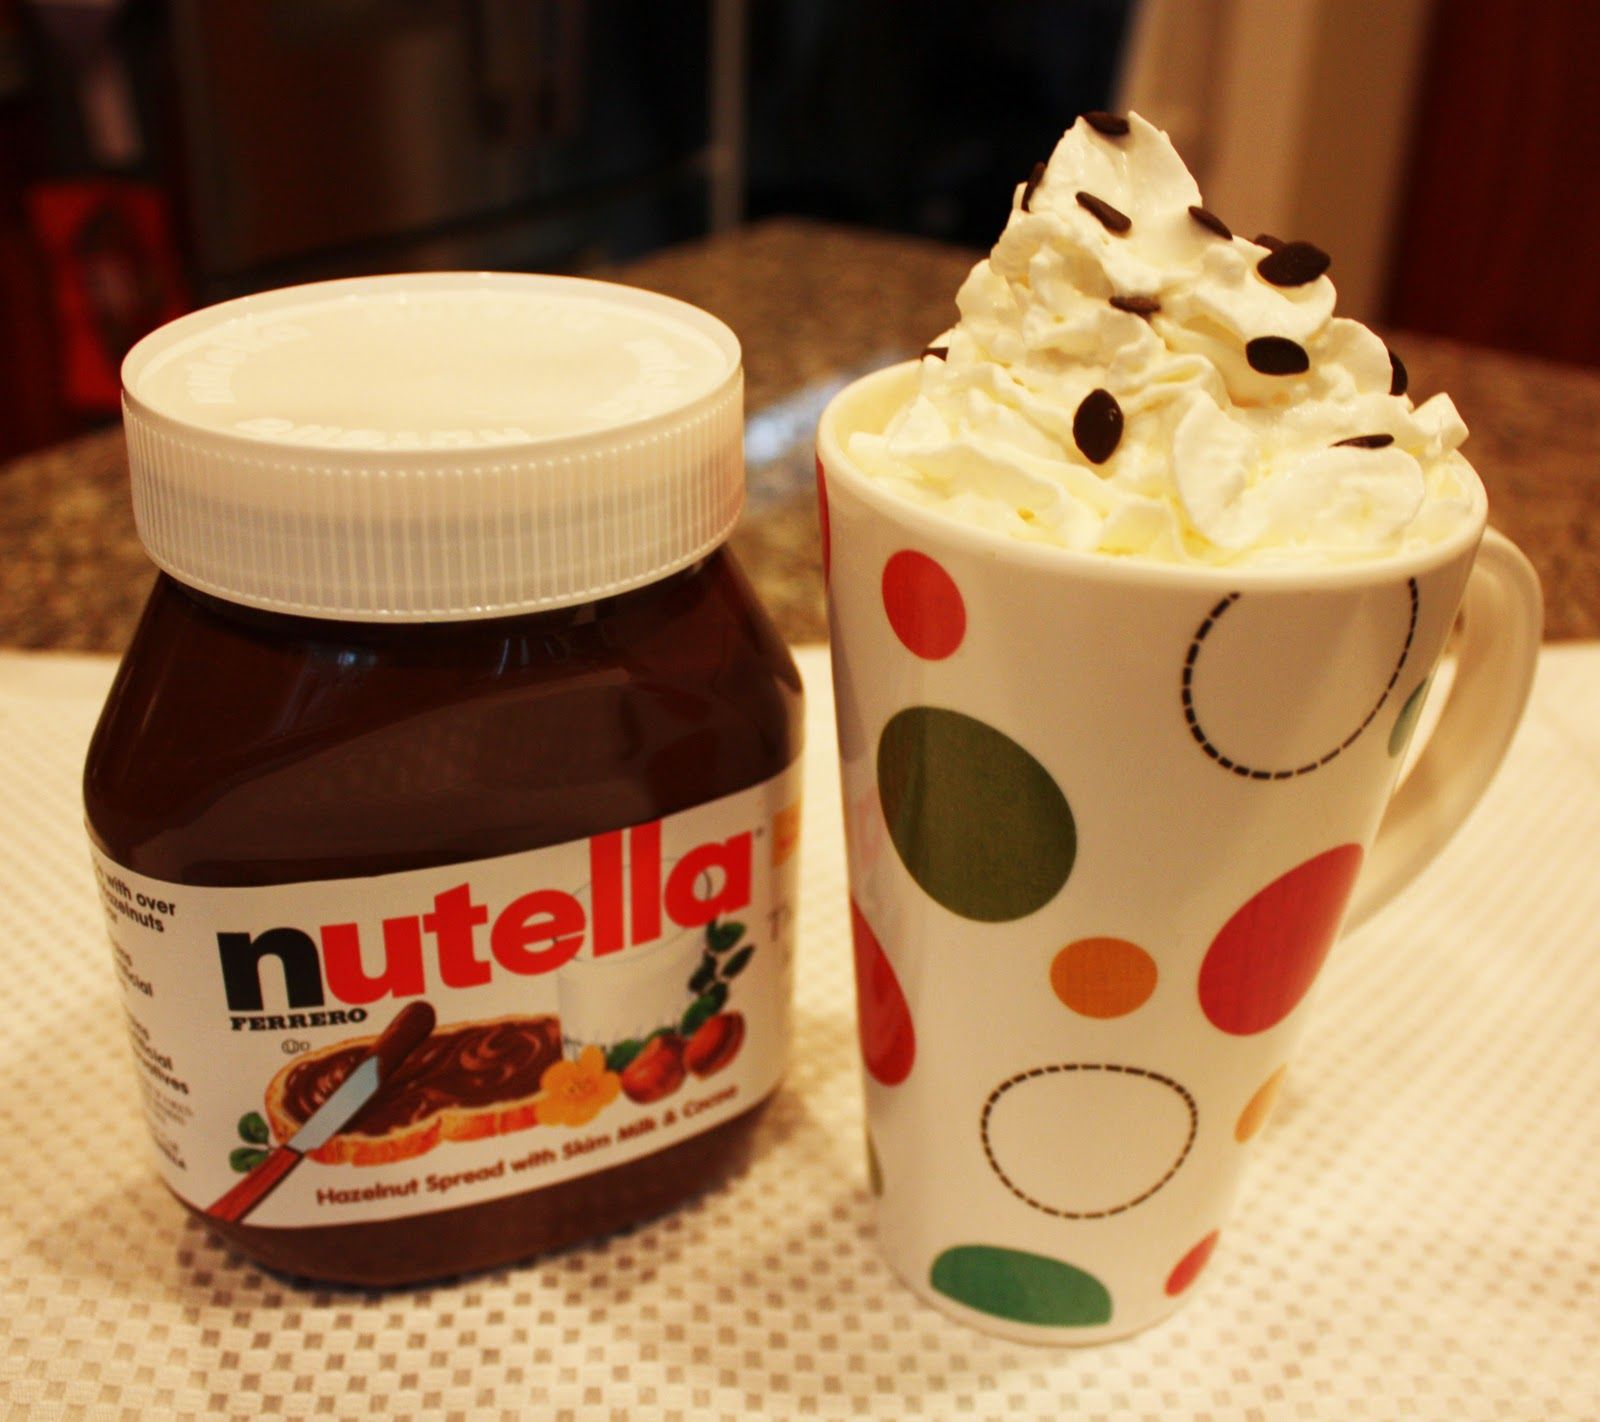 Crockpot Nutella Hot Chocolate  This seems like the perfect drink for our annual